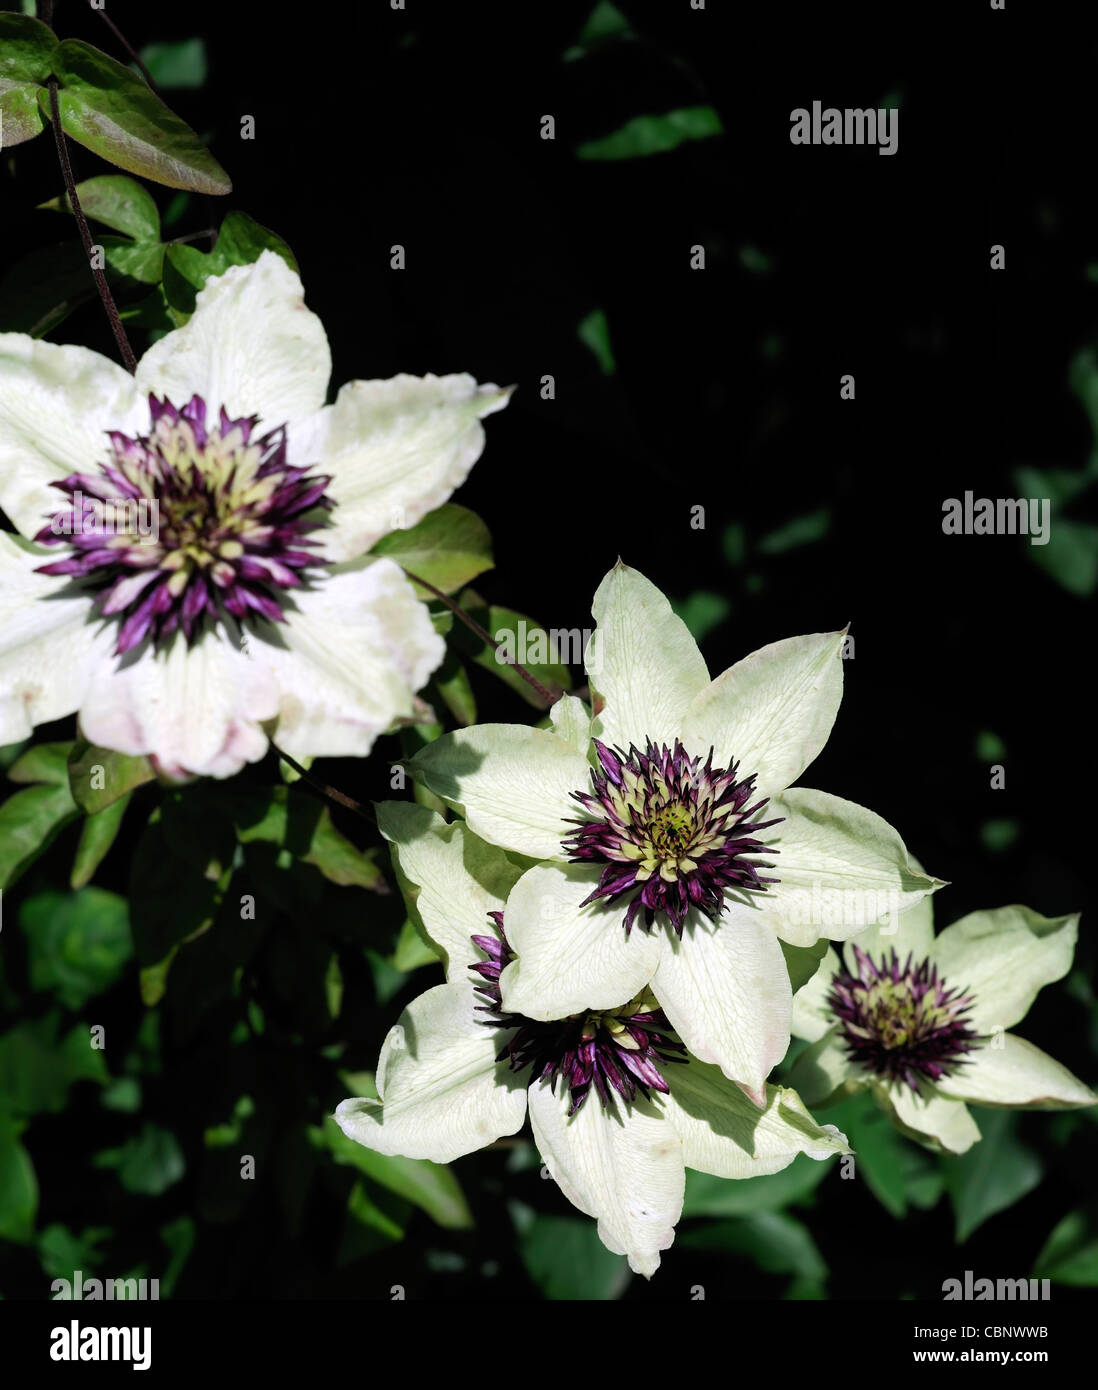 Clematis Sieboldii Florida purple white flowers fully double climber climbing plant perennial flower bloom blossom white purple Stock Photo